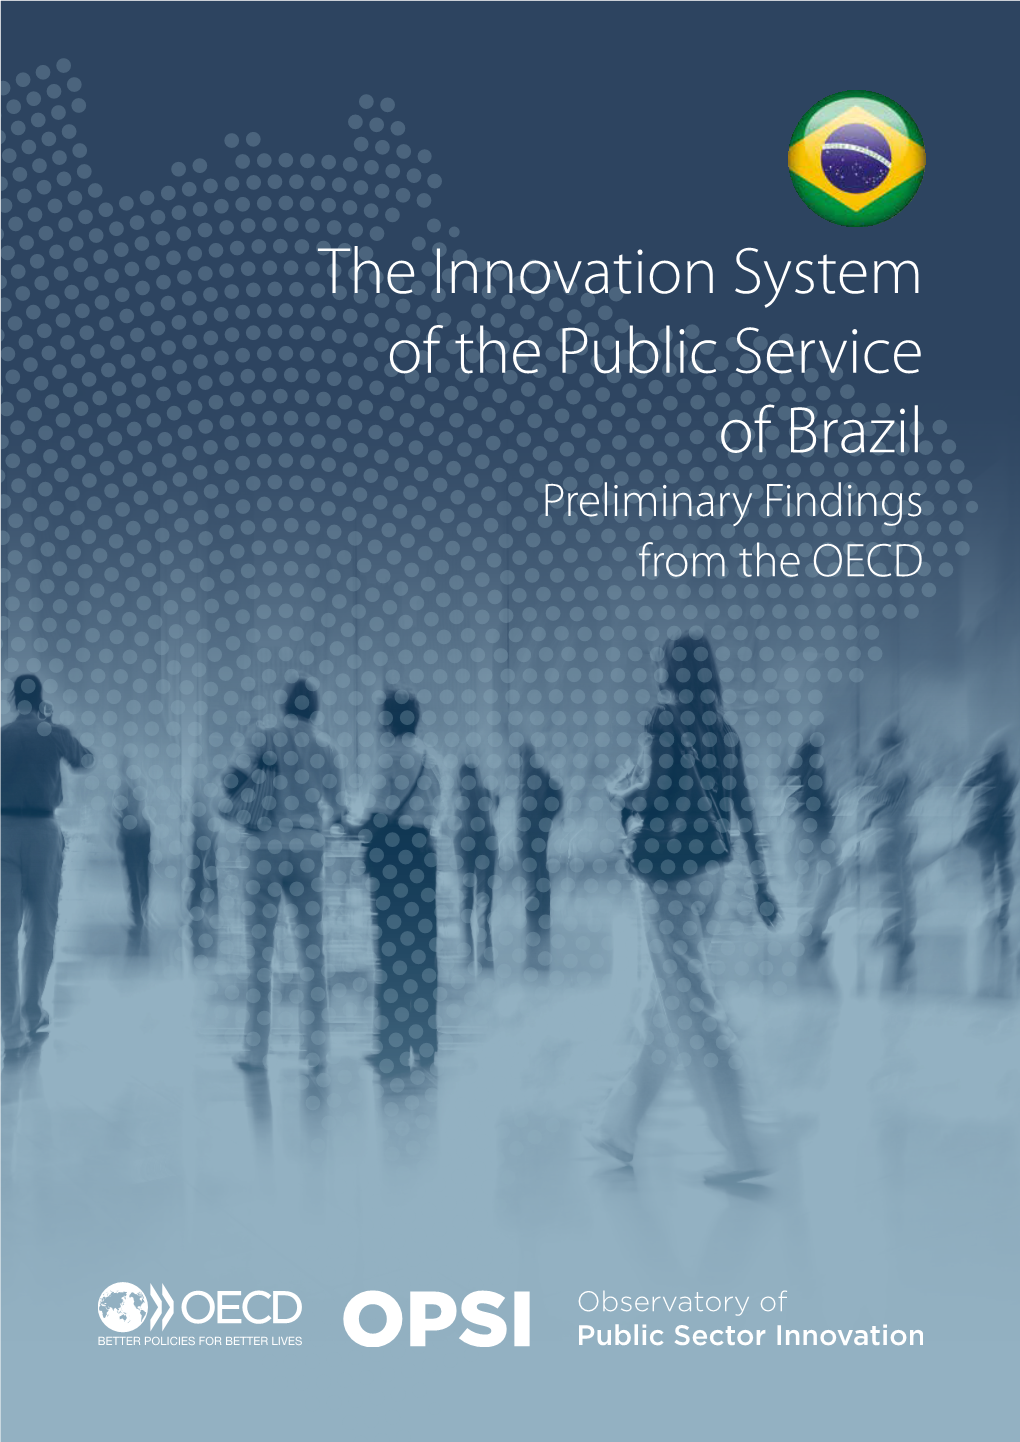 The Innovation System of the Public Service of Brazil Preliminary Findings from the OECD